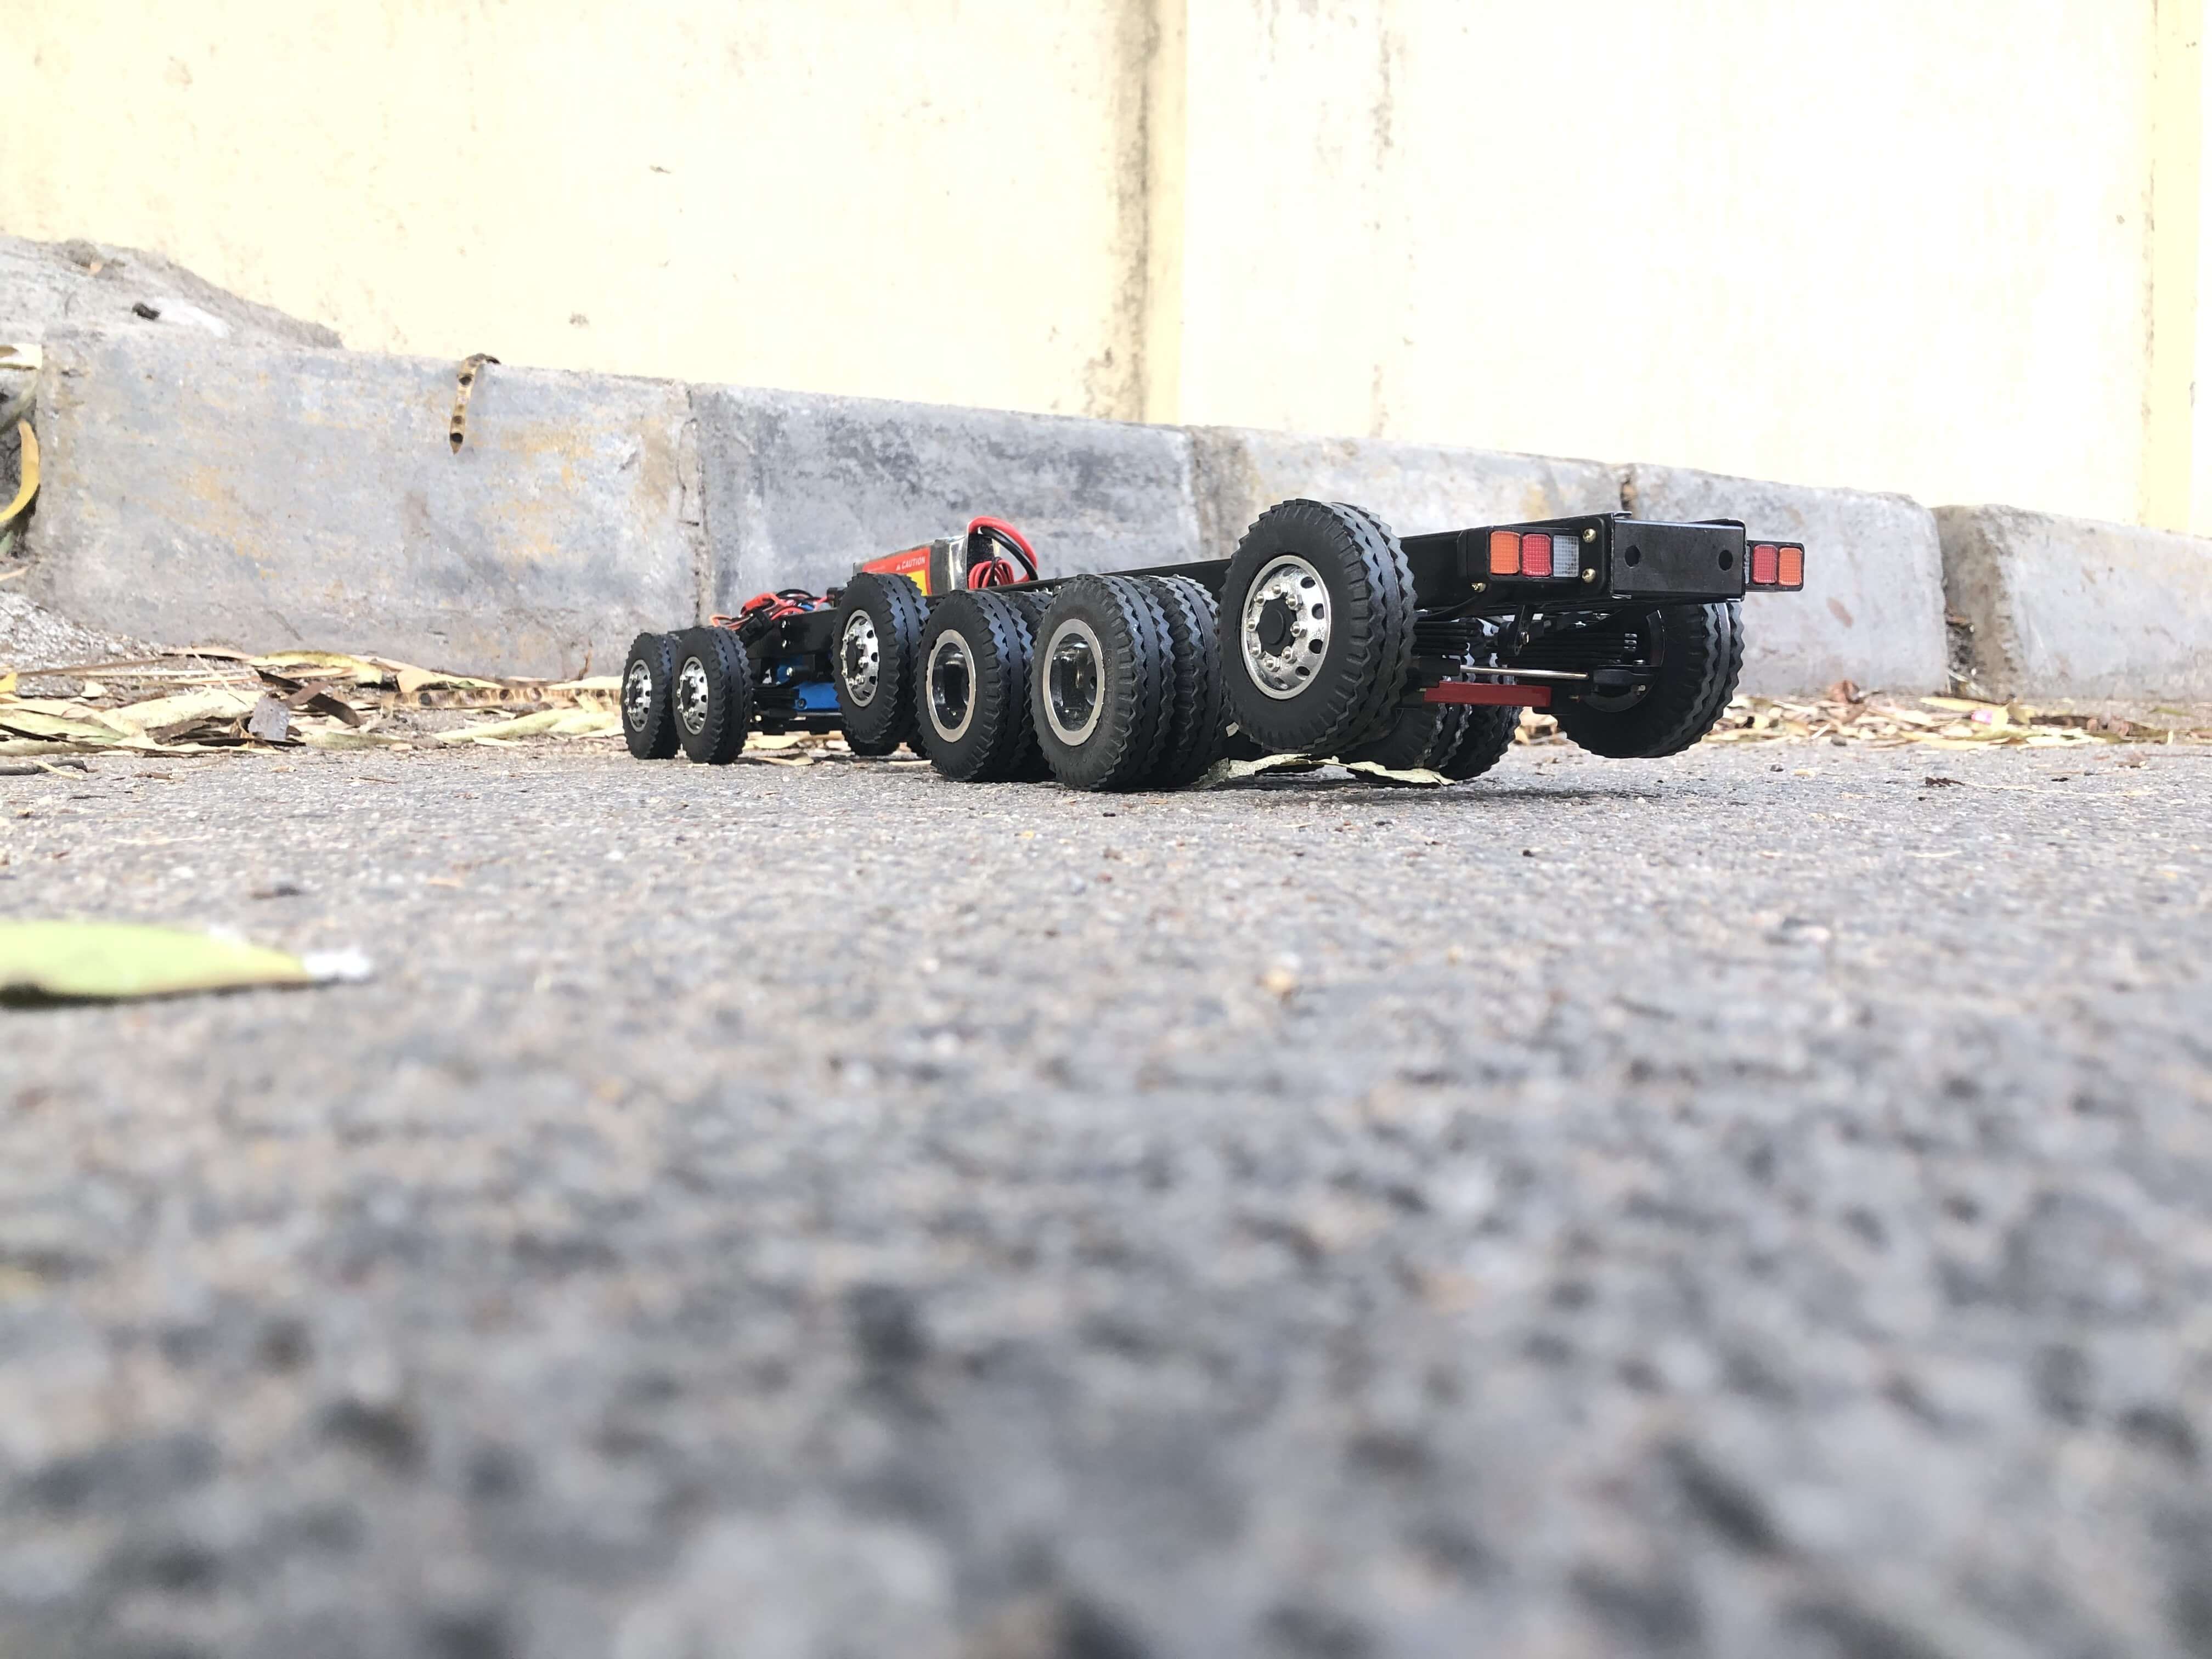 16 Wheel ilft Axle Chassis with Motor-Gearbox and Steering Servo (Rear Multiaxle Drive) (Scale 1:18)